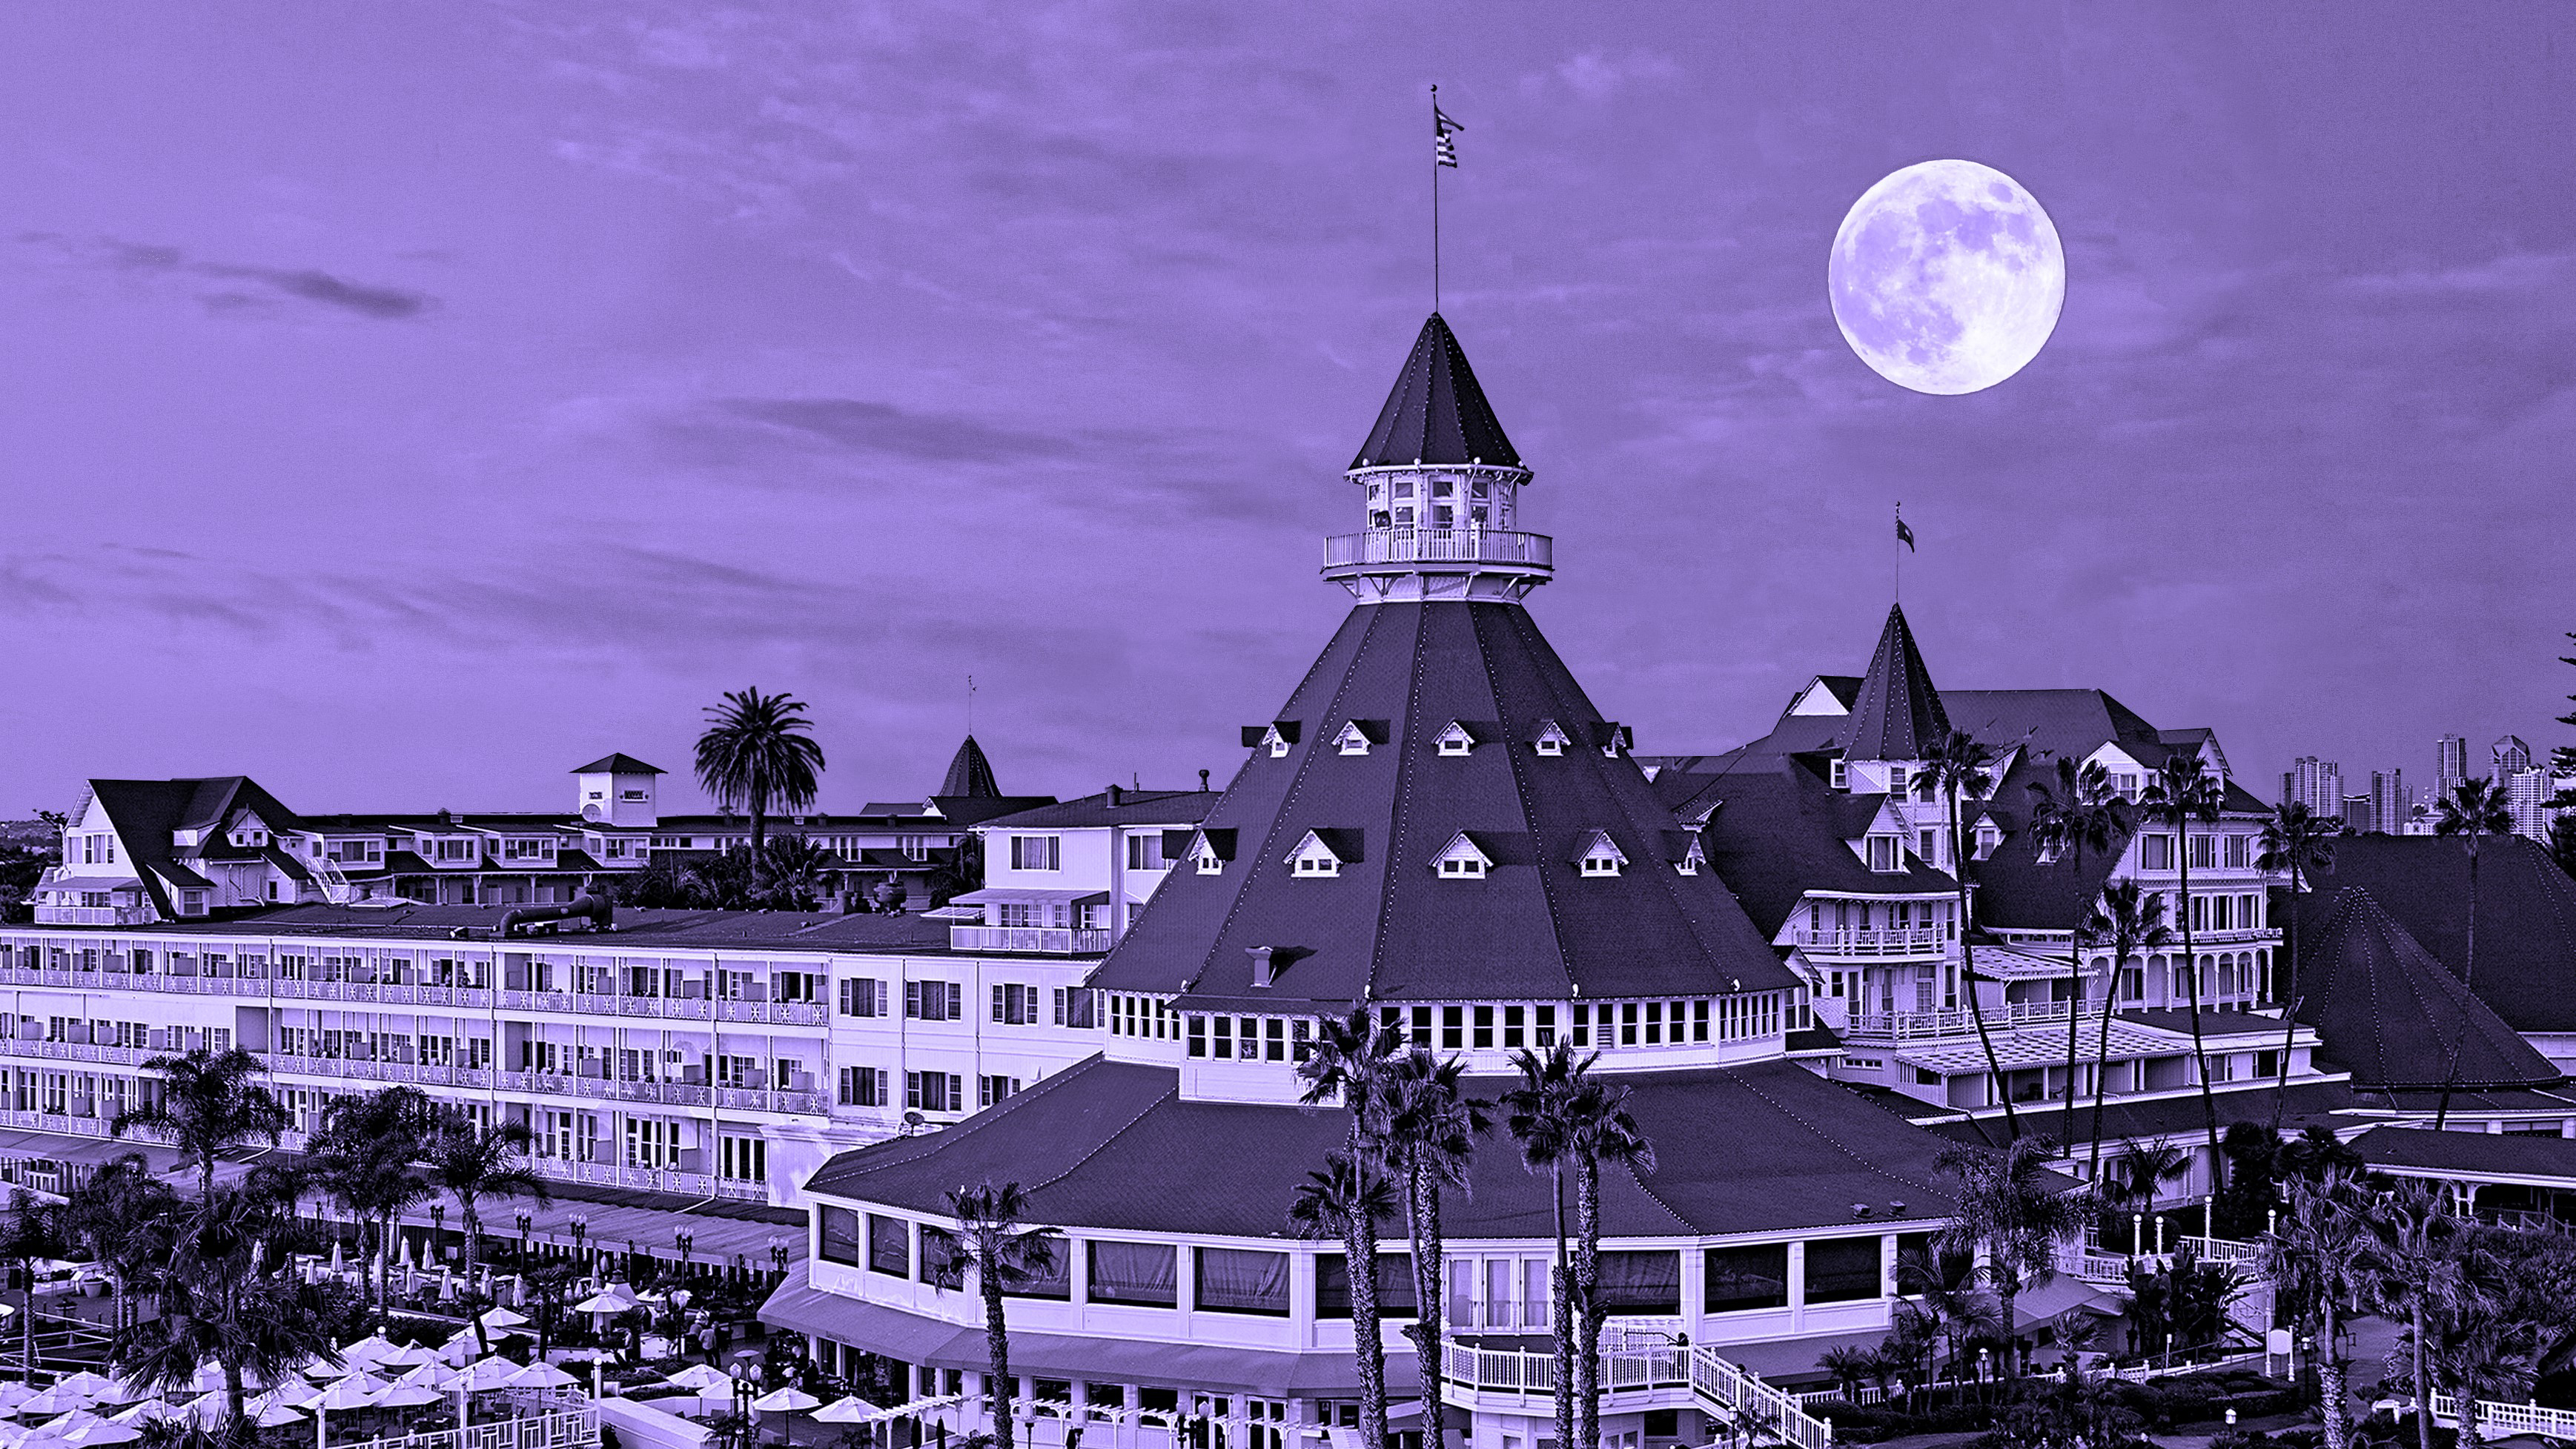 The 2021 Top 25 Historic Hotels of America Most Haunted Hotels List Announced